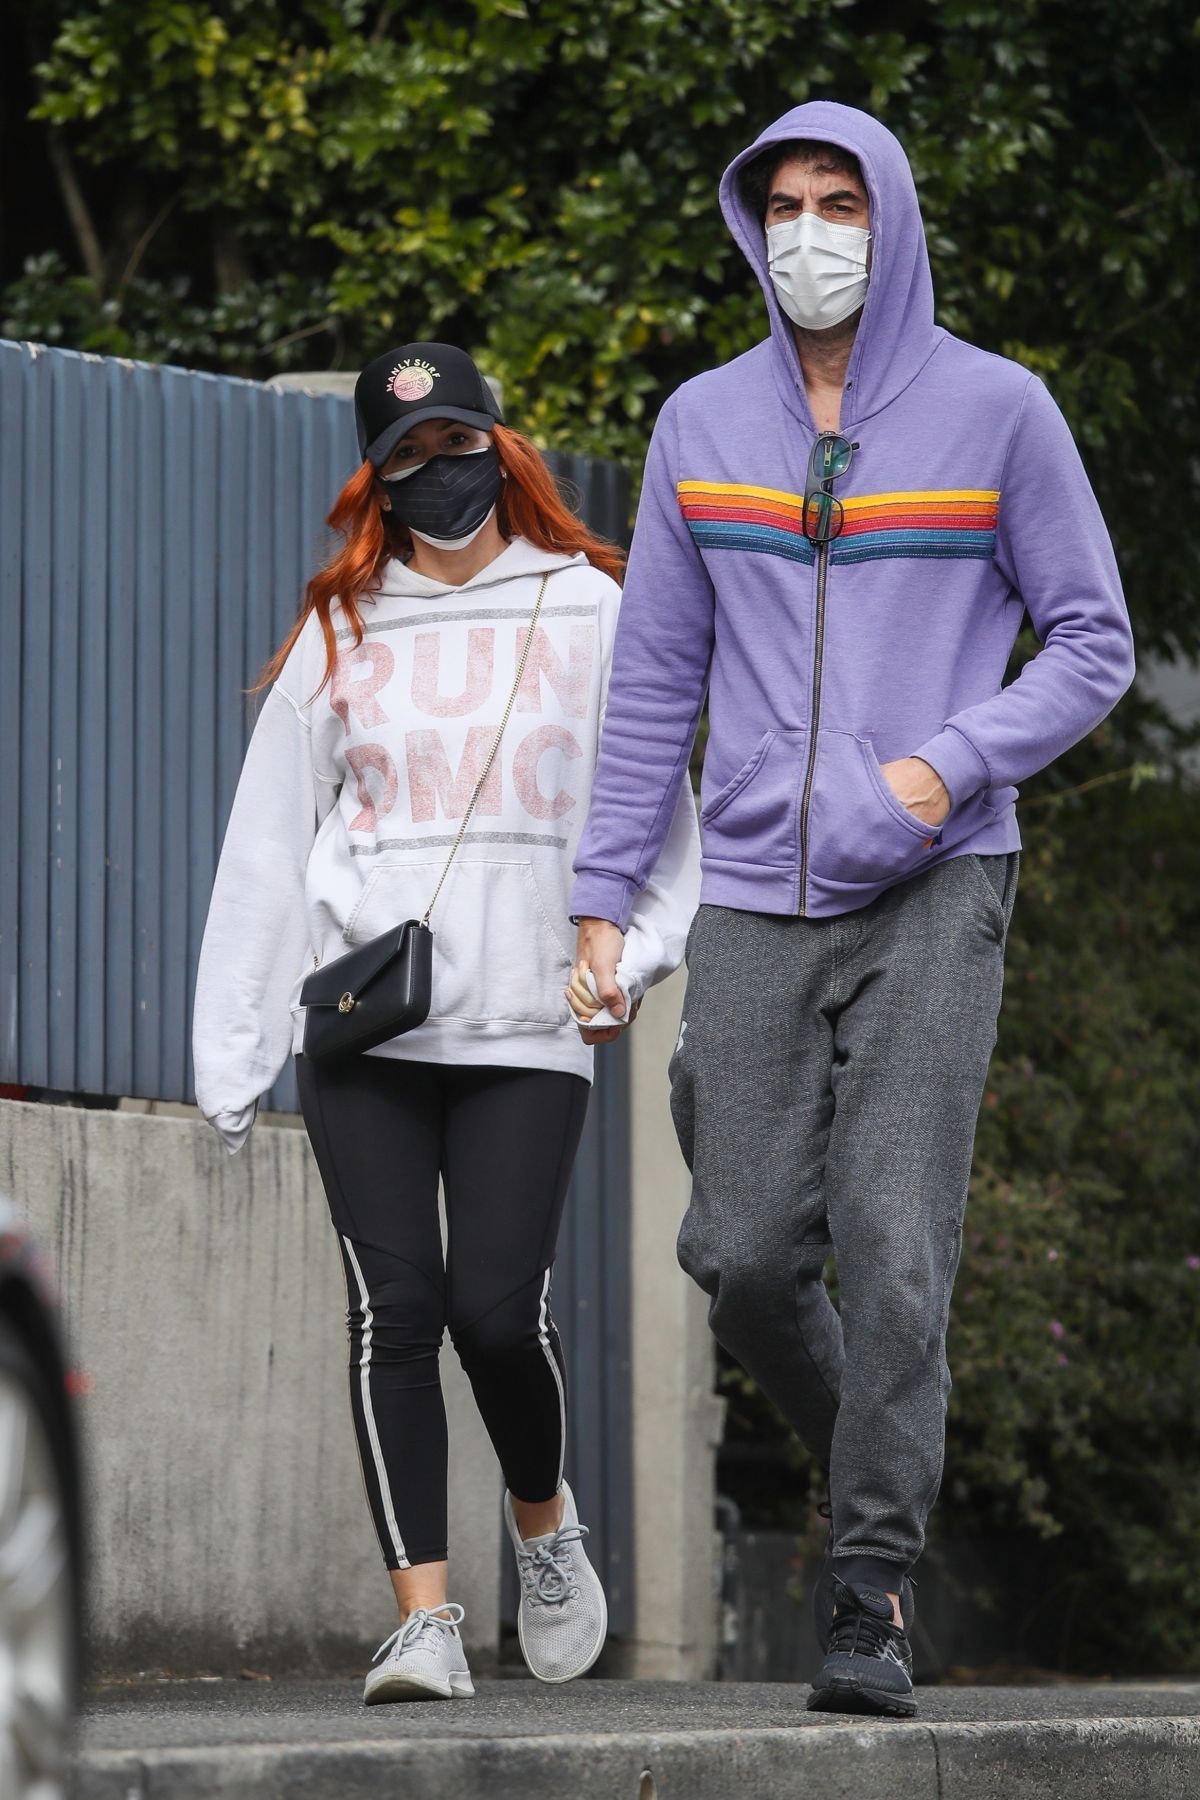 isla-fisher-and-sacha-baron-cohen-out-sydyney-07-20-2021-9.jpg